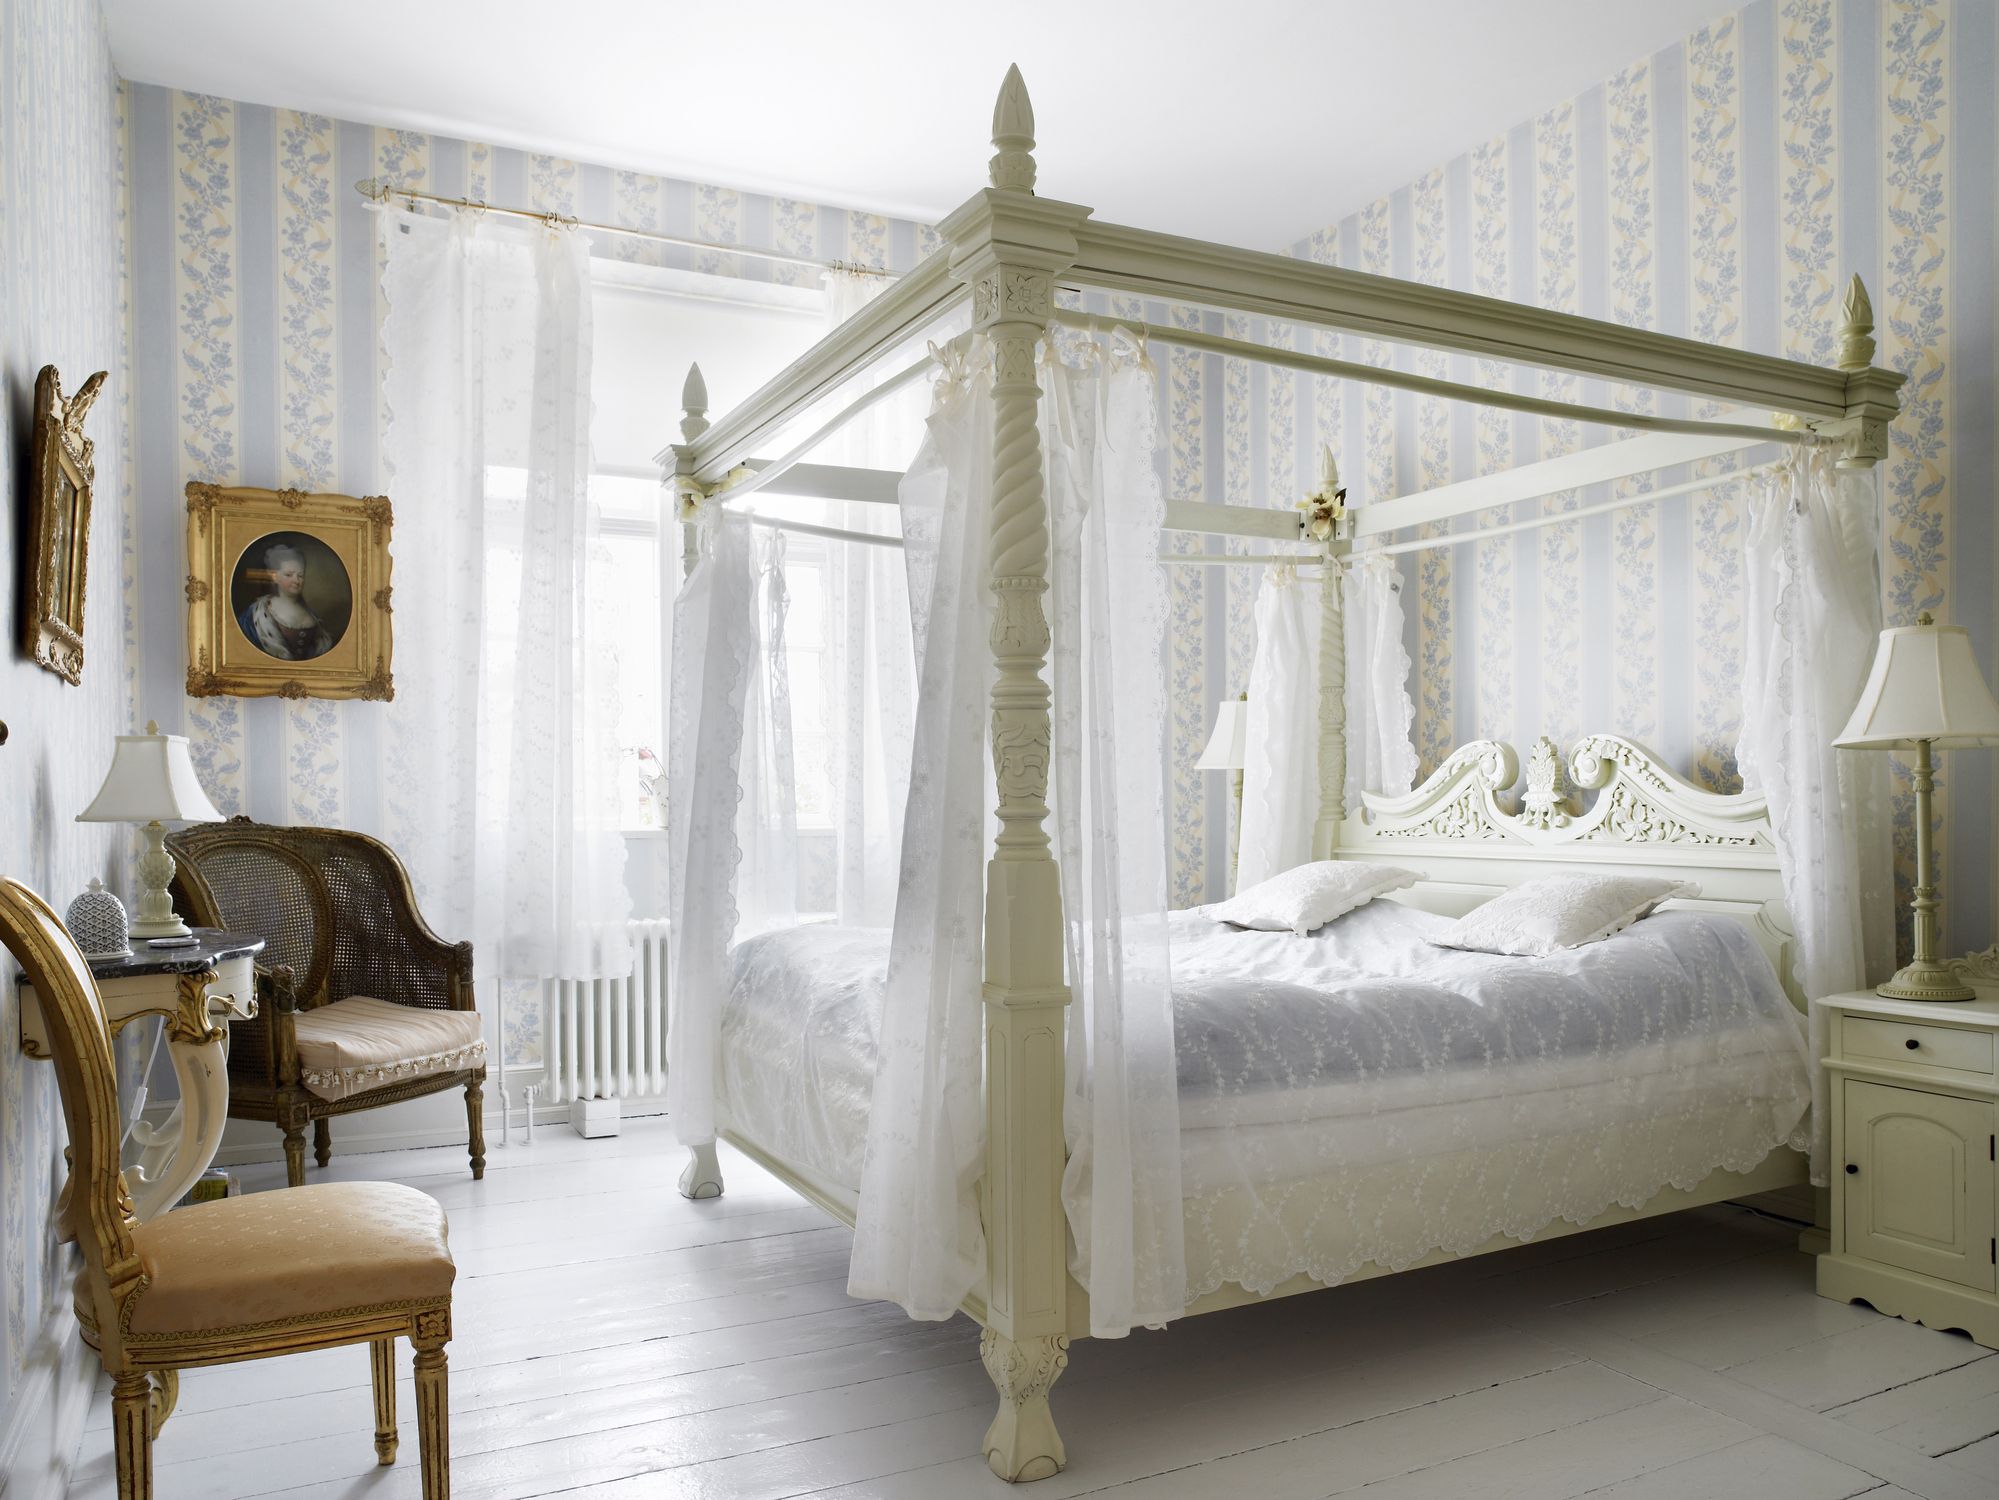 town and country bedroom furniture bridgend